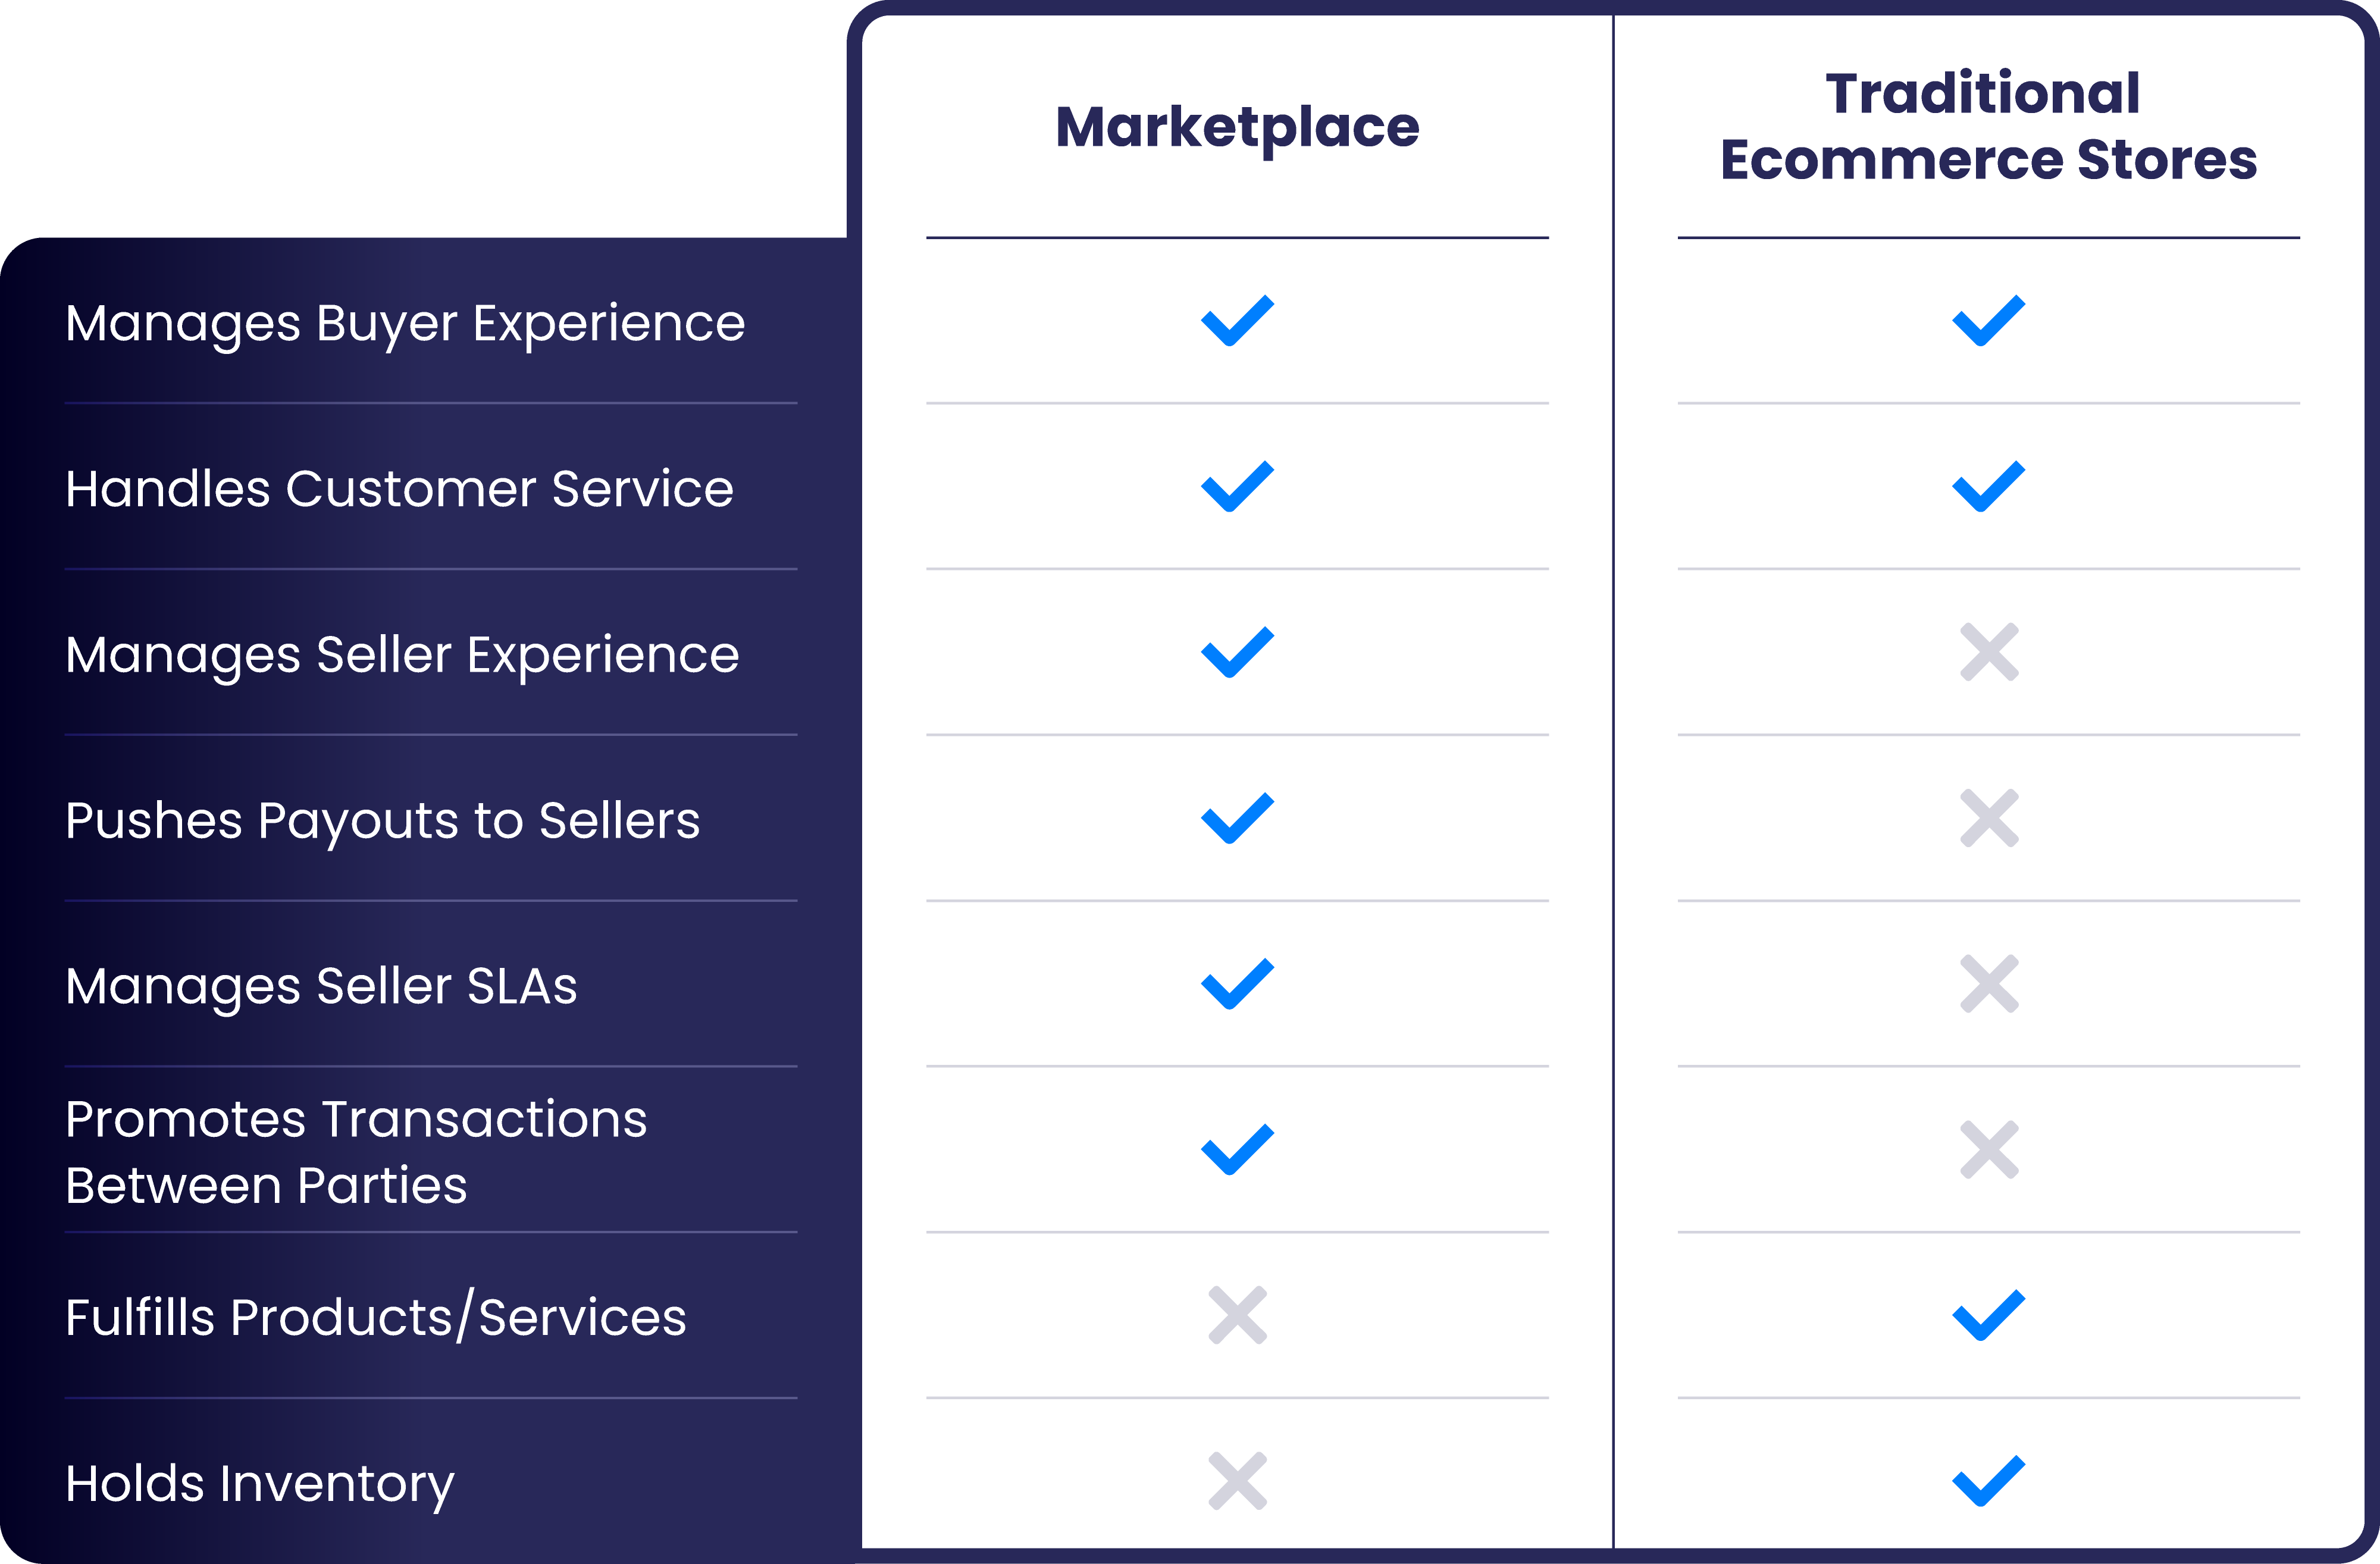 Some major differences between a marketplace and a traditional ecommerce store